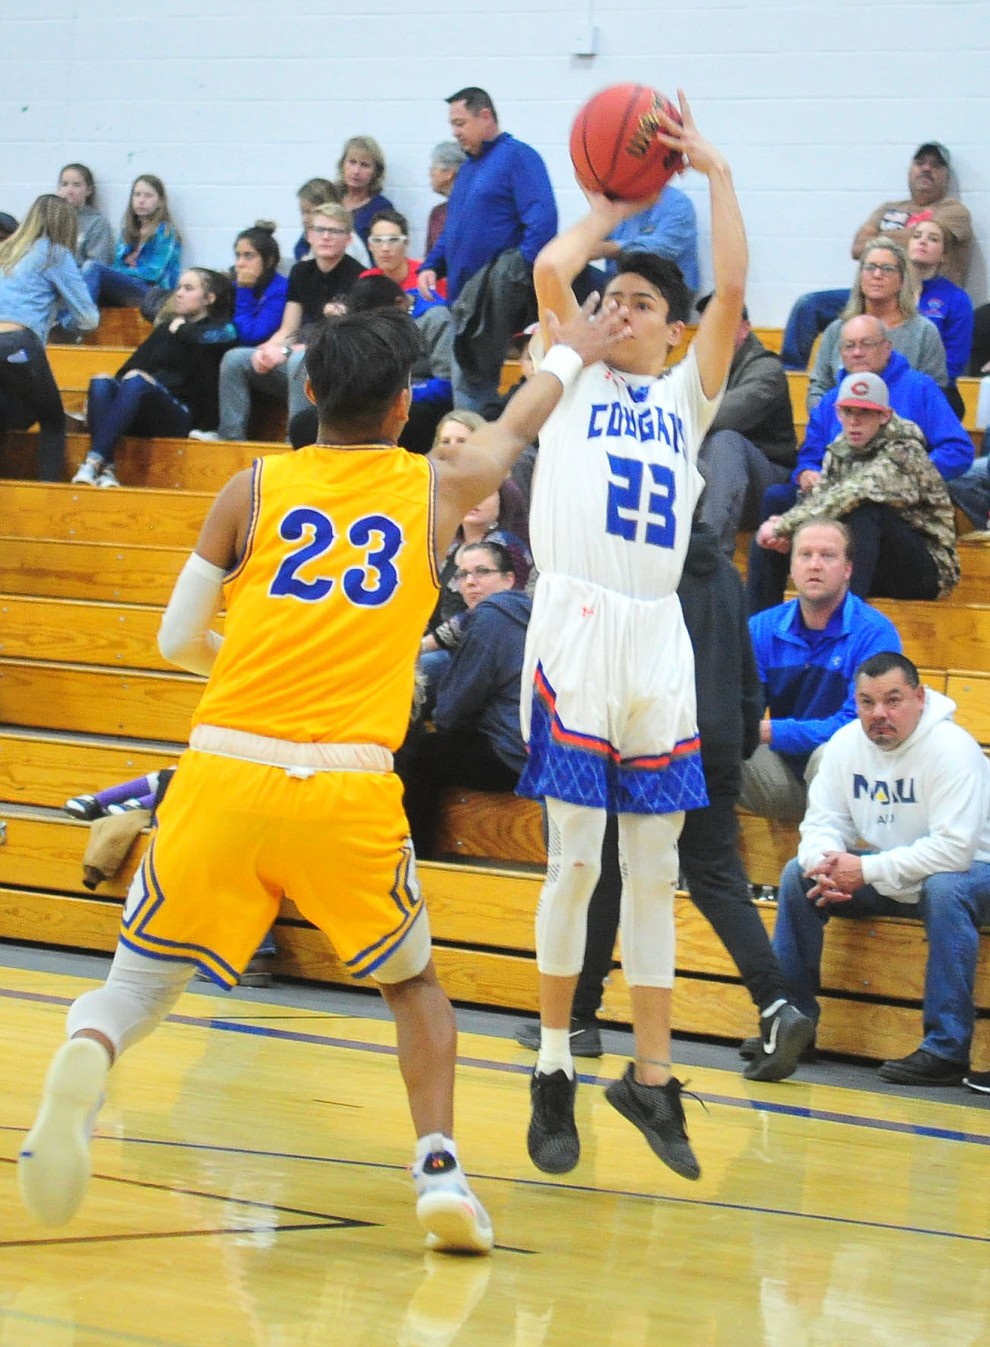 Chino Valley's Jayden Torres shoots a long two-pointer as they face the Kingman Bulldogs Thursday, Jan. 24, 2019 in Chino Valley. (Les Stukenberg/Courier).